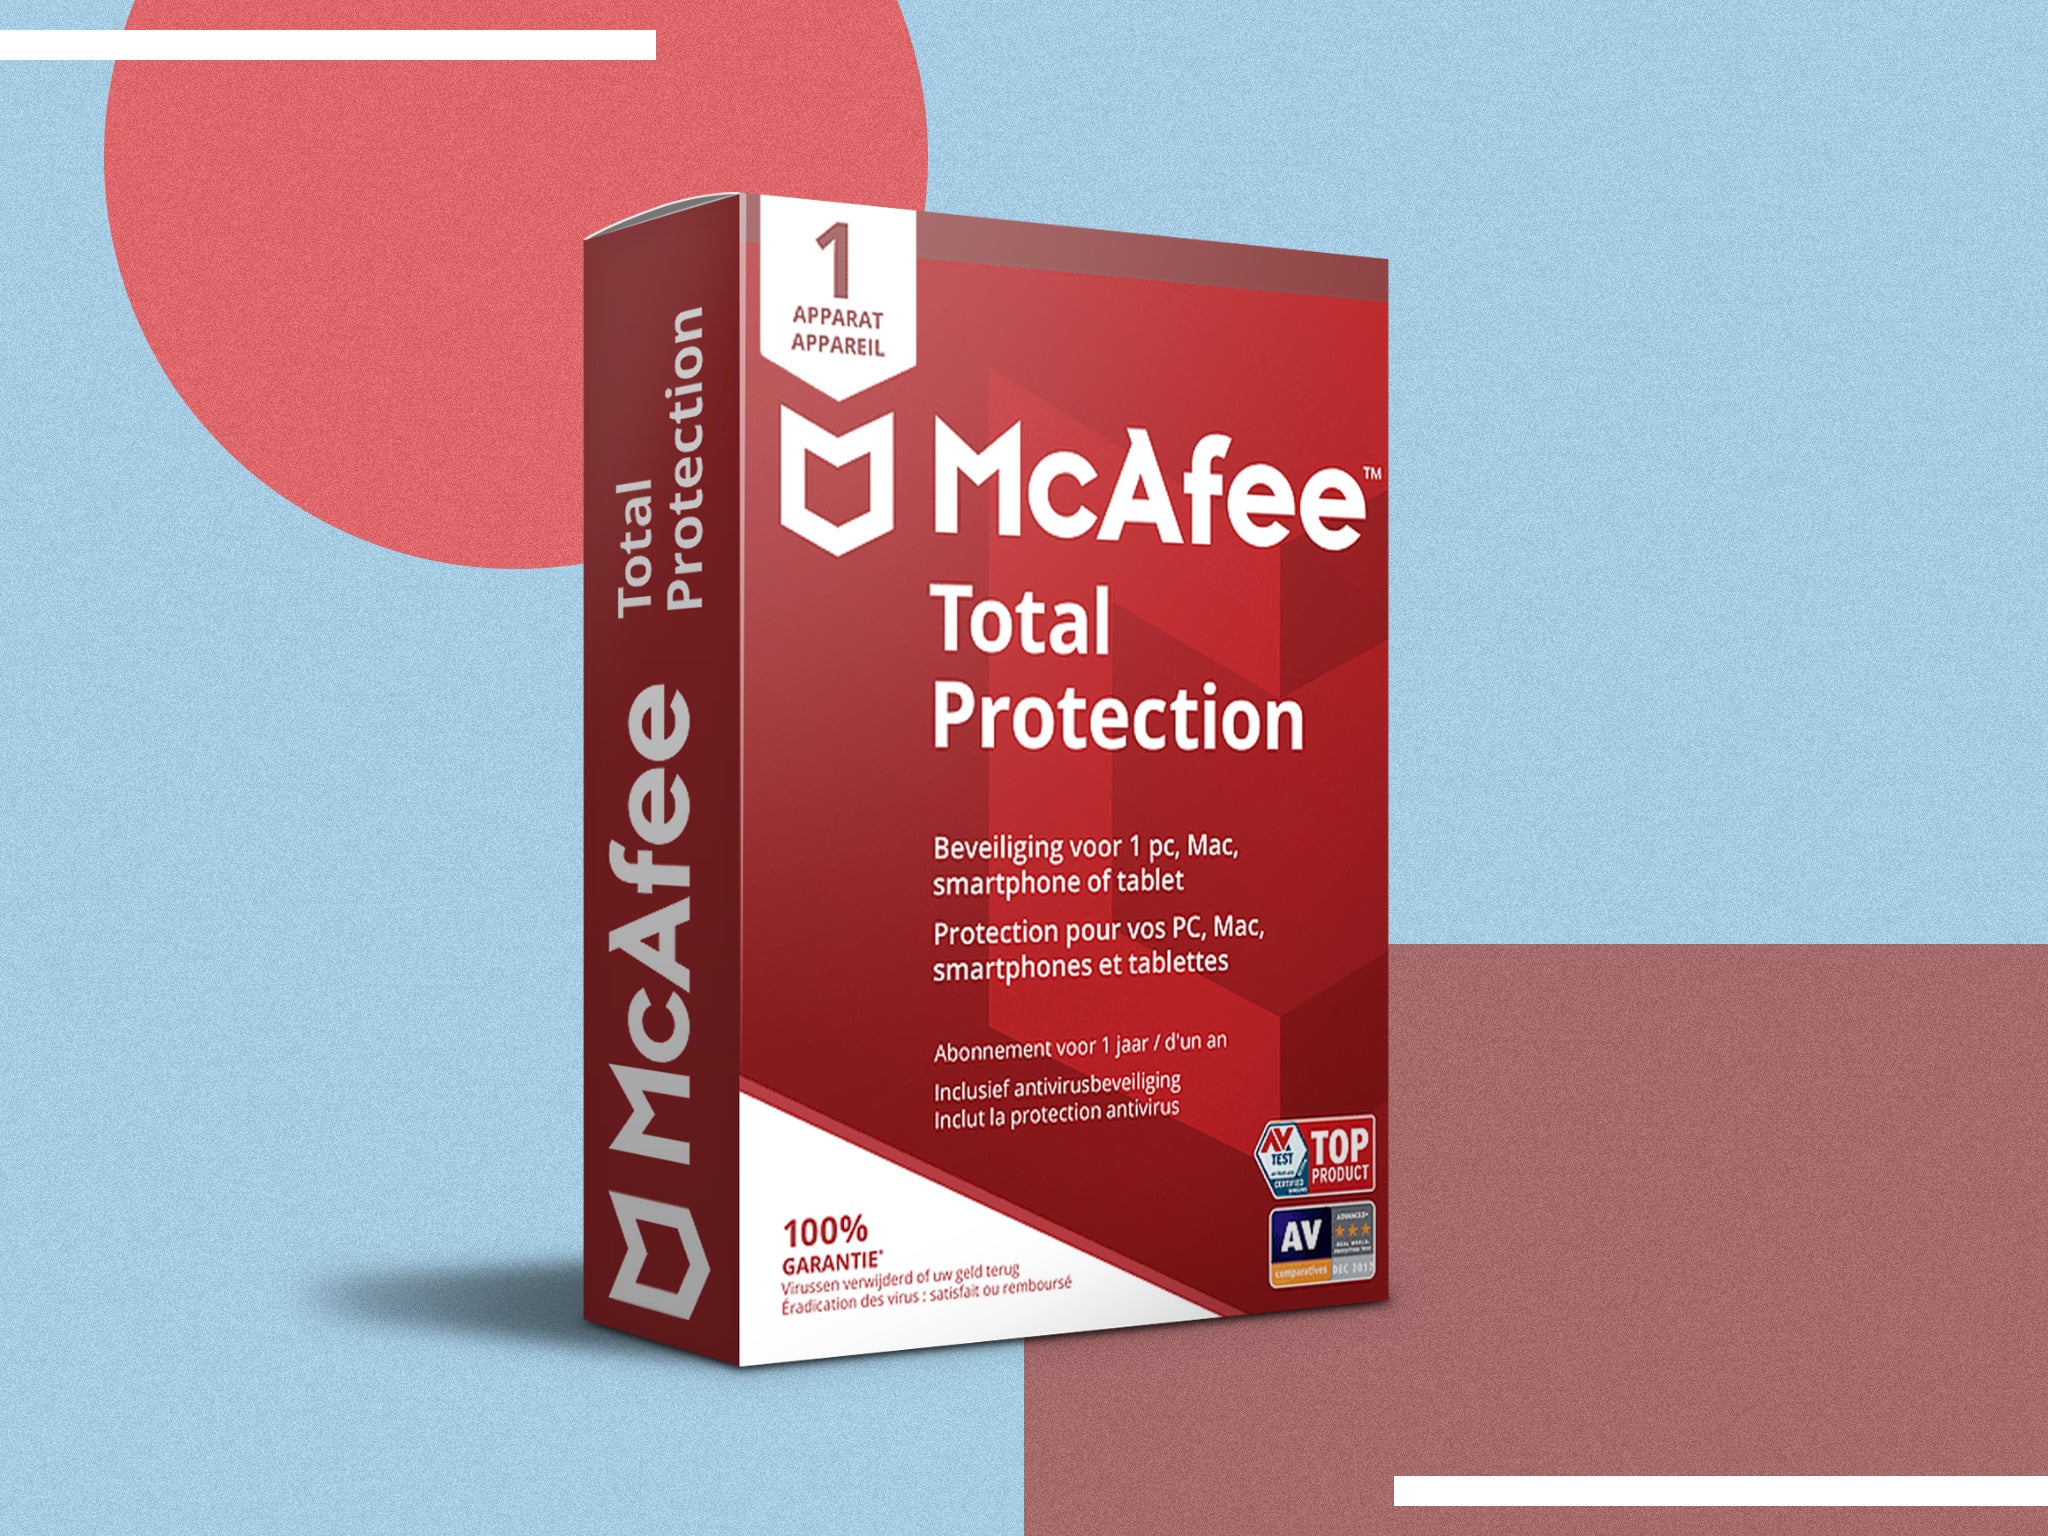 McAfee total protection review 2021 Antivirus and security software